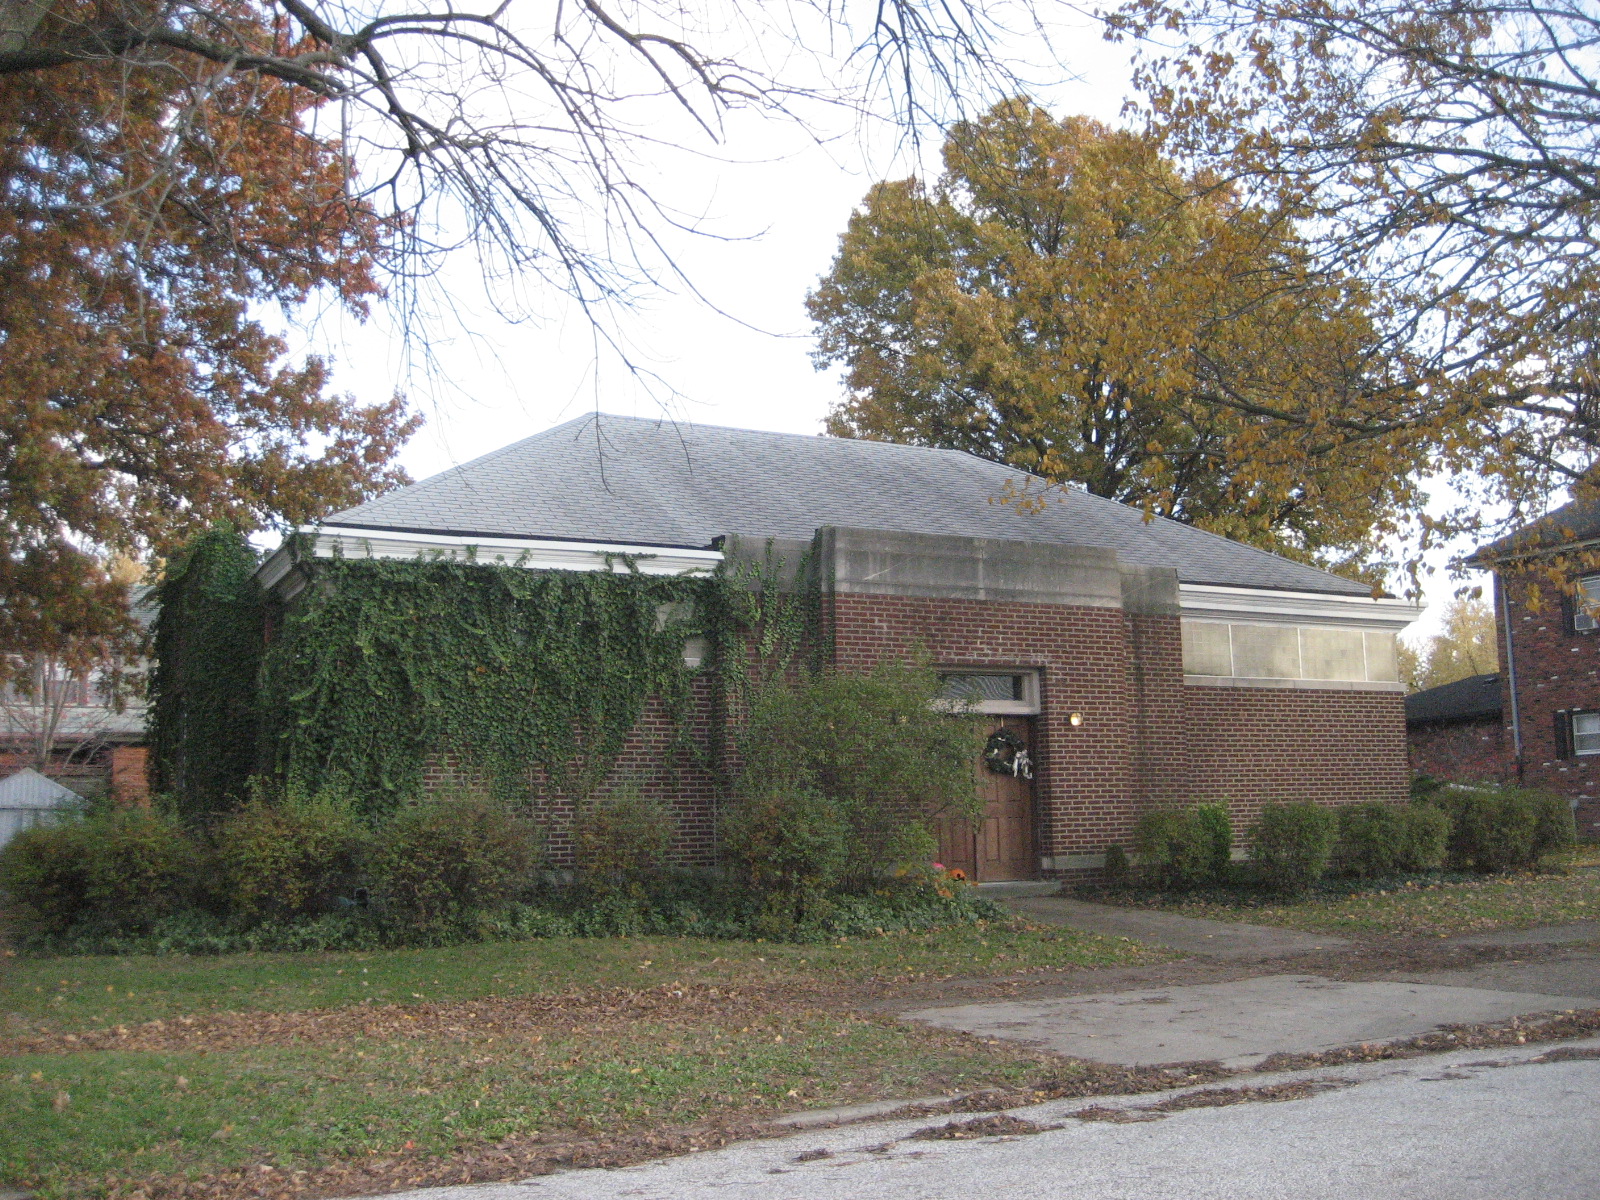 Howell Library